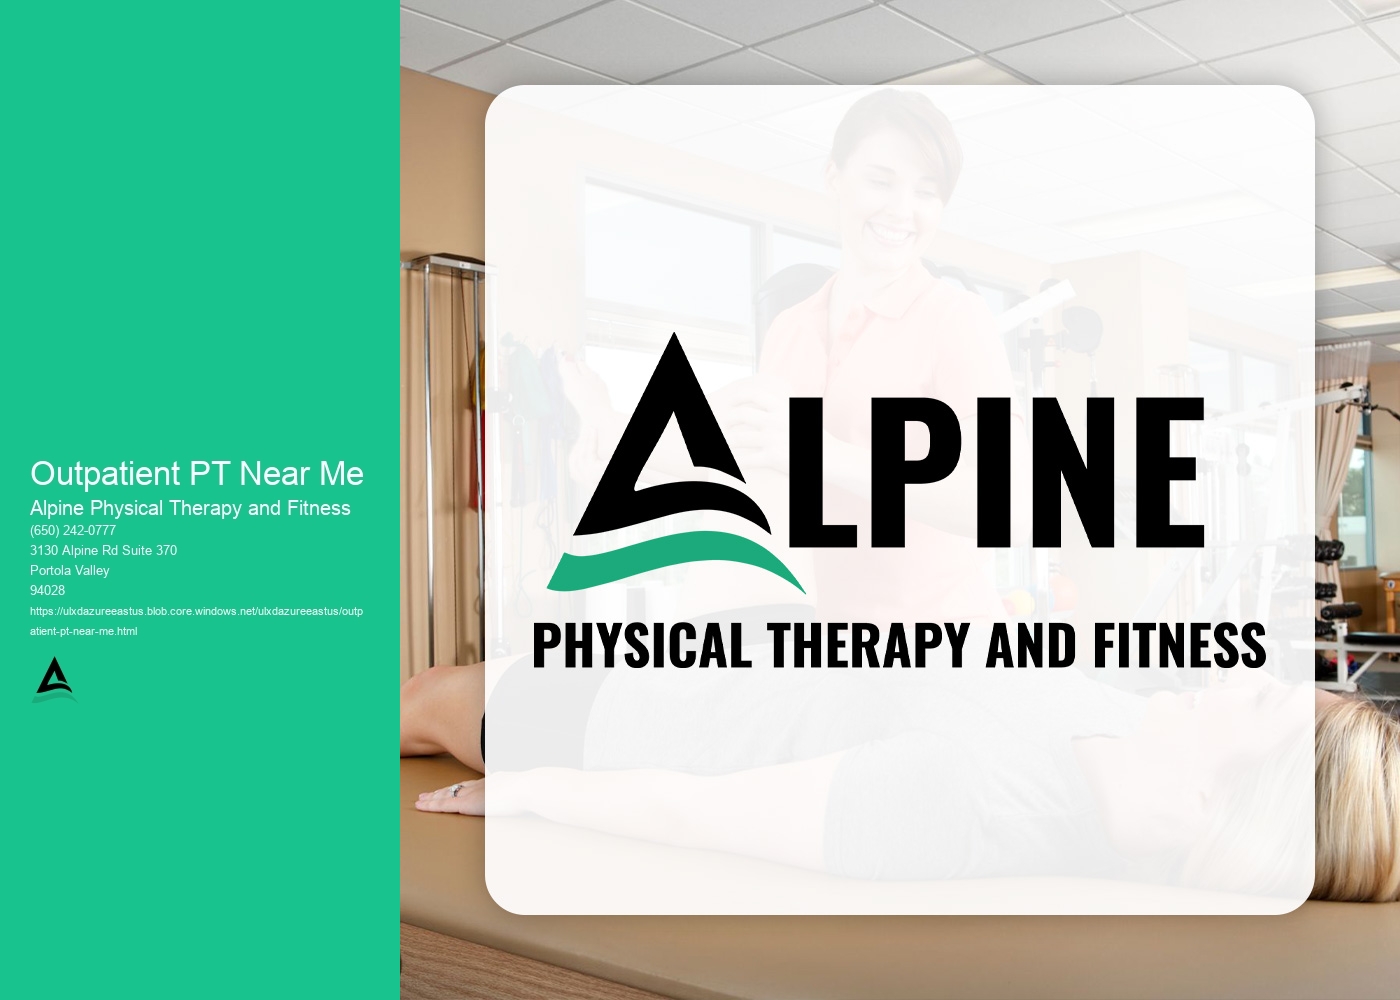 What are the key differences between outpatient physical therapy and inpatient rehabilitation programs?